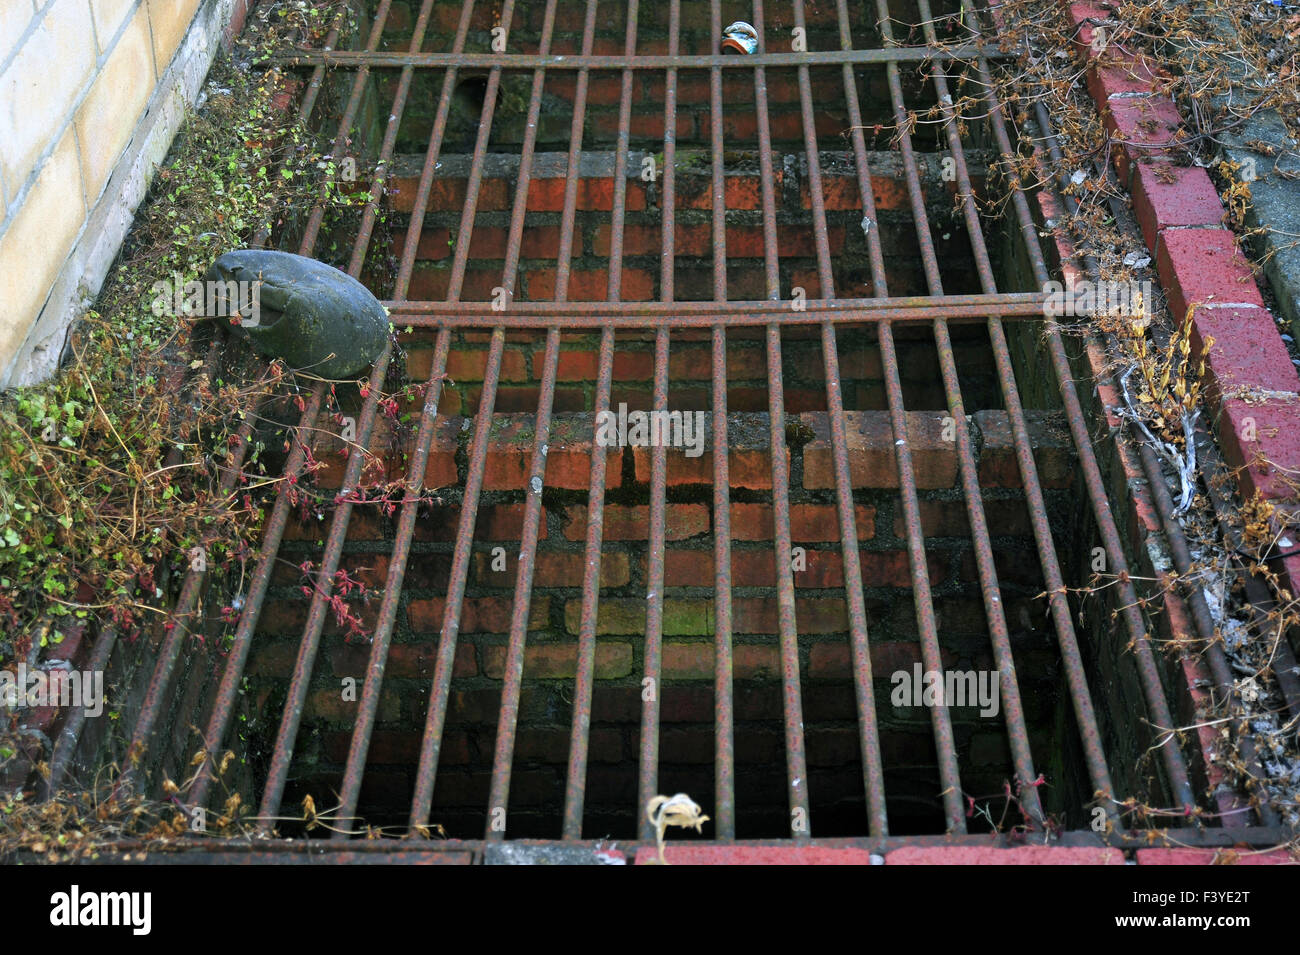 Metal bars covering a brick lined drain in the town of Bath in Somerset. Stock Photo